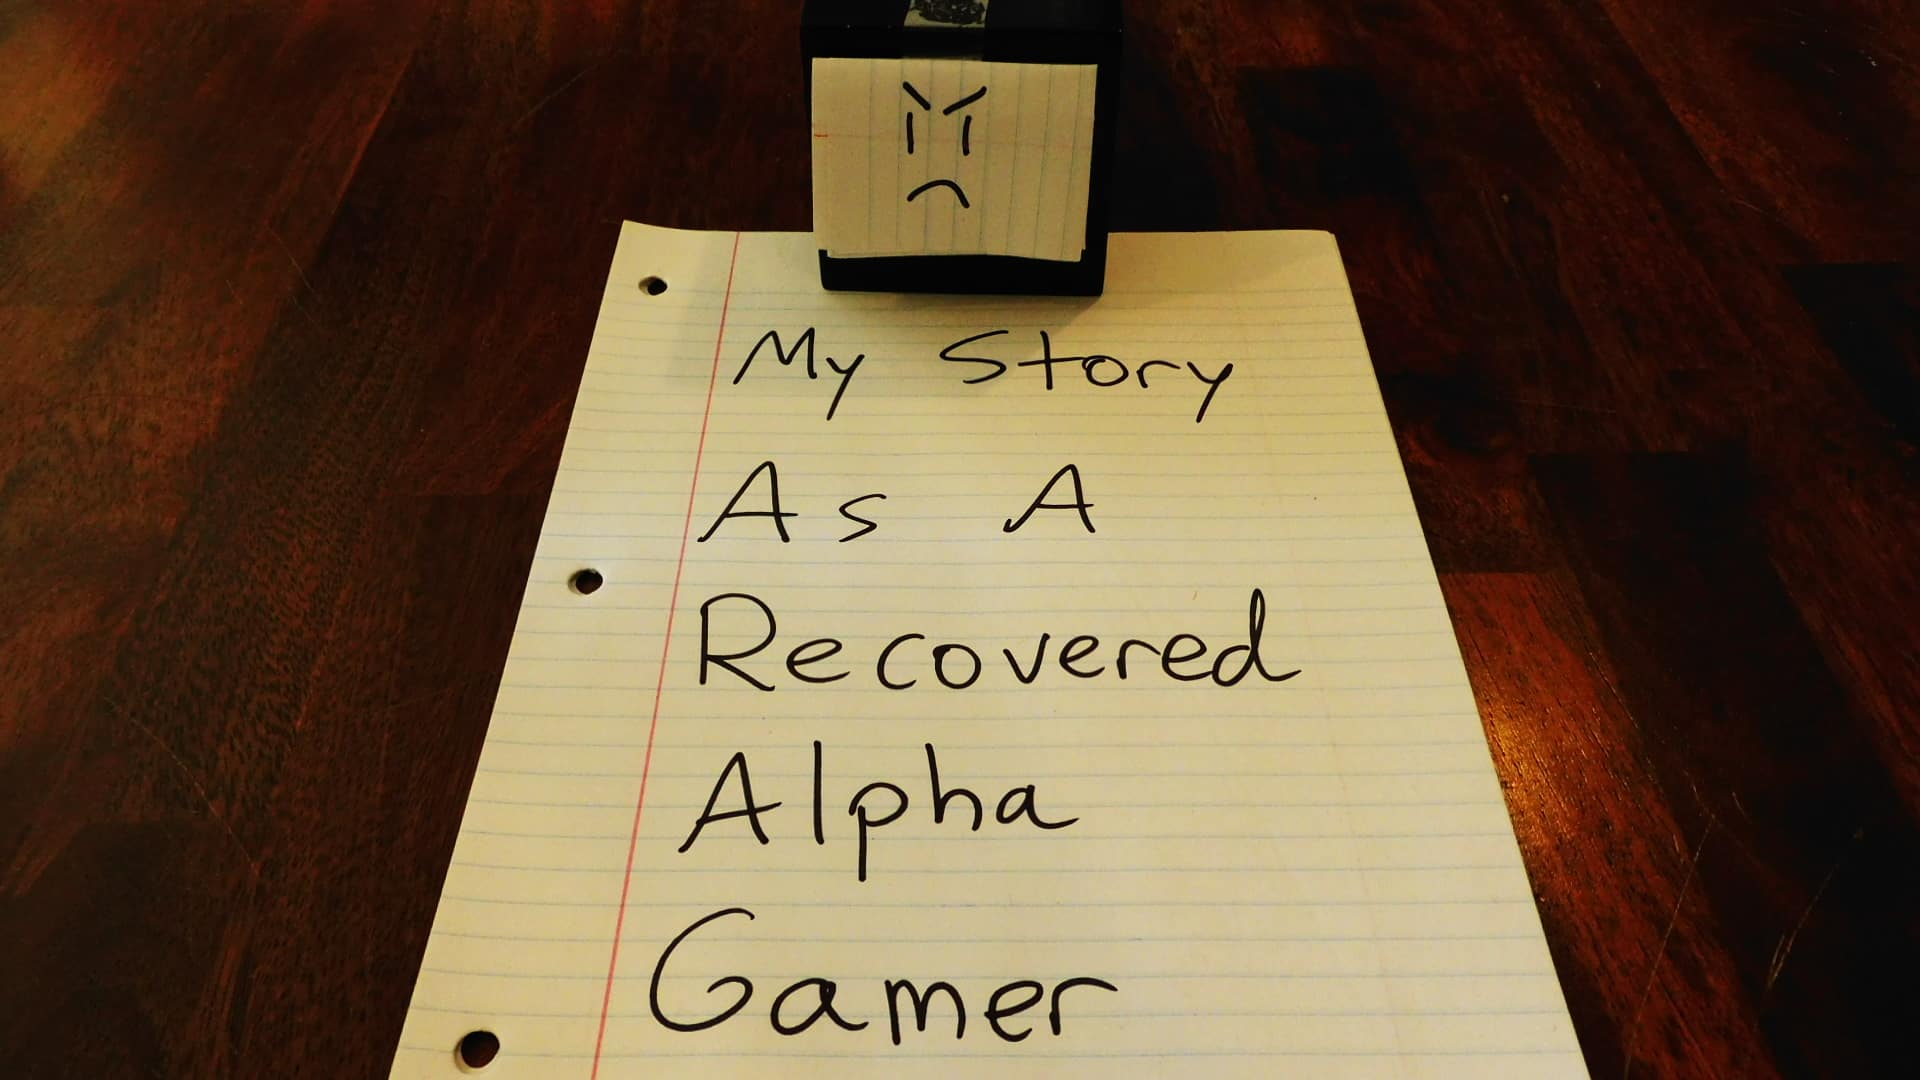 Alpha Gamer Al sitting on a piece of paper saying, "My Story As A Recovered Alpha Gamer."